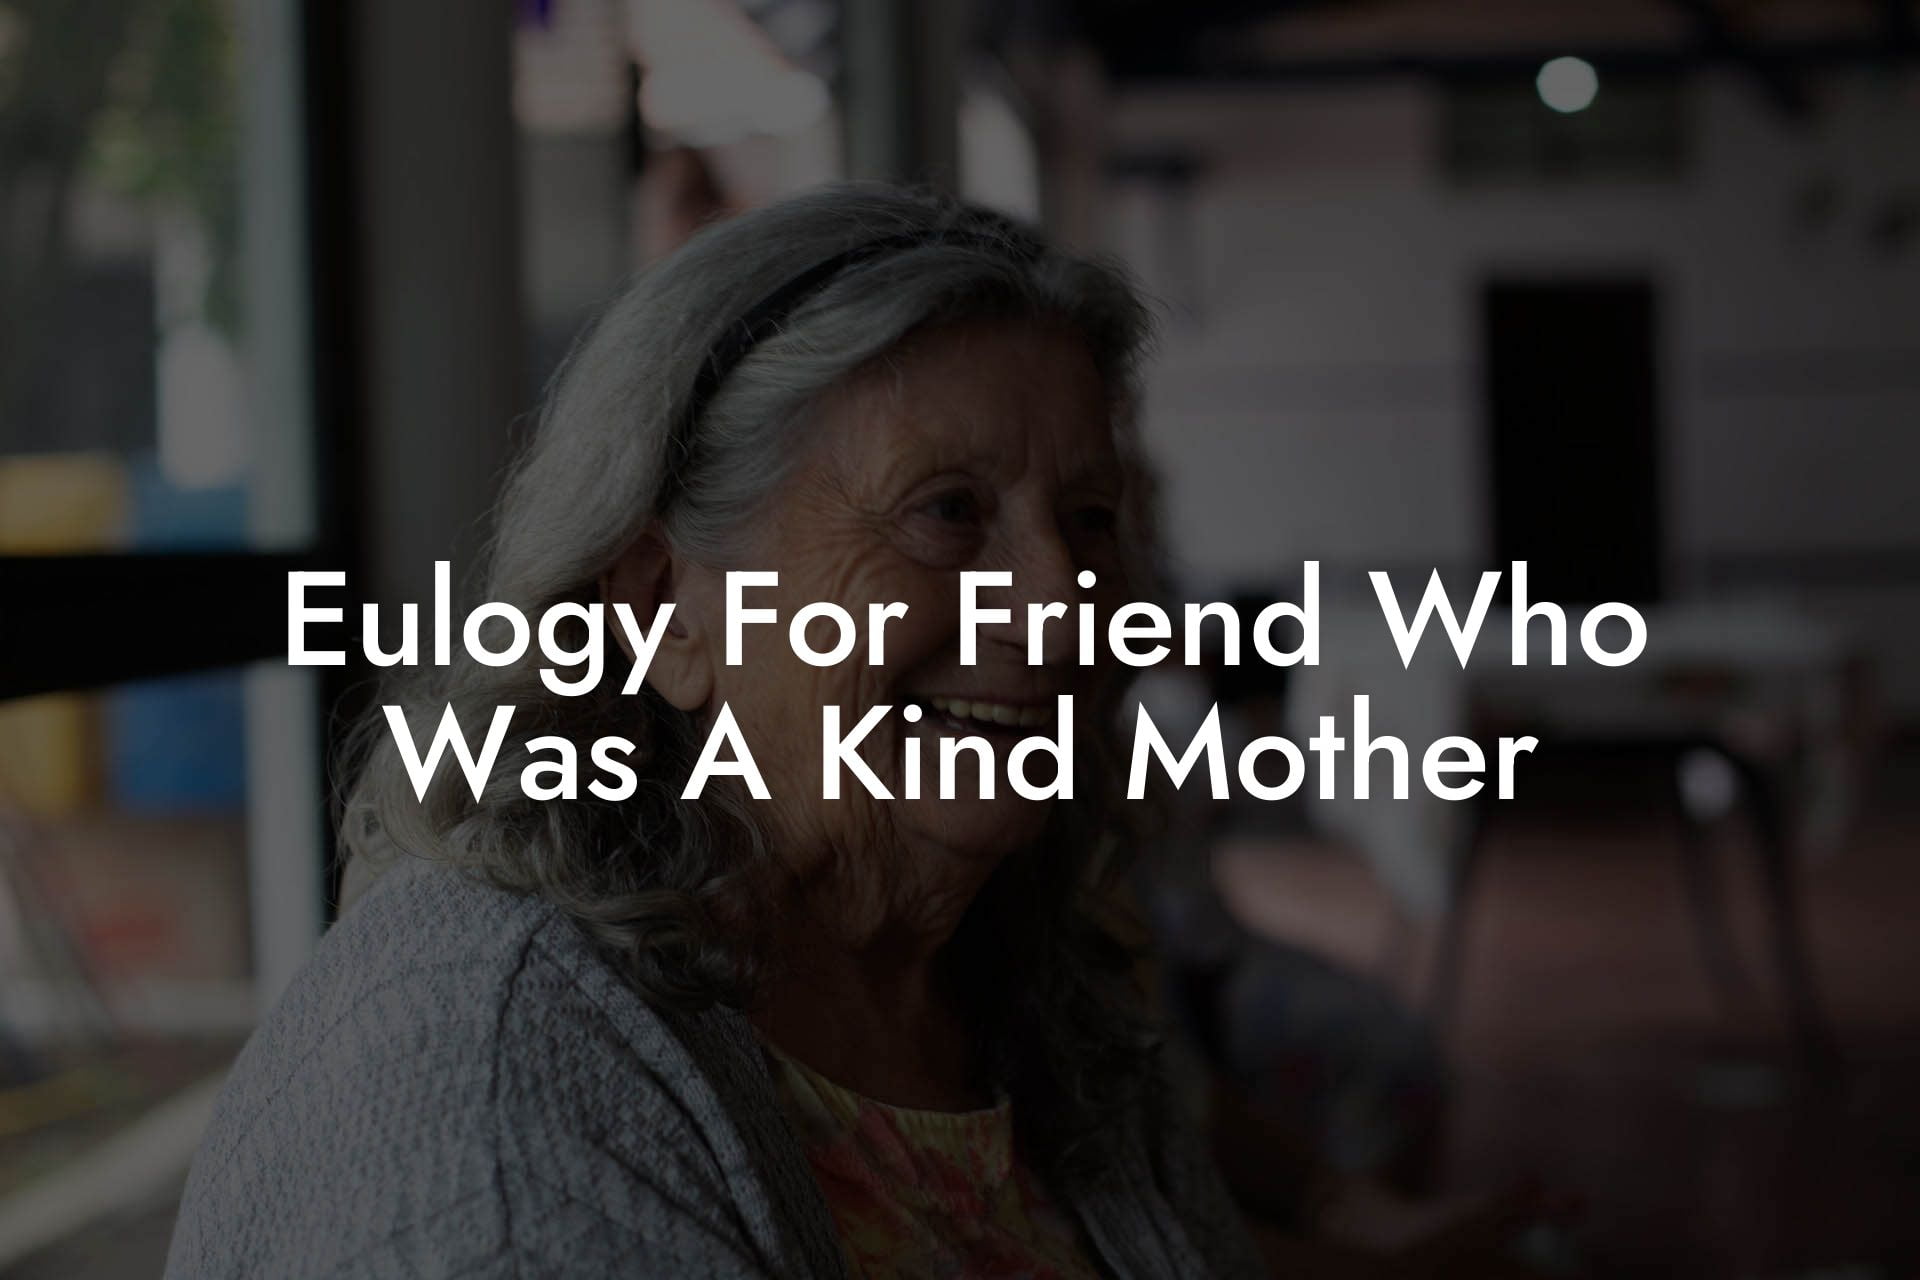 Eulogy For Friend Who Was A Kind Mother